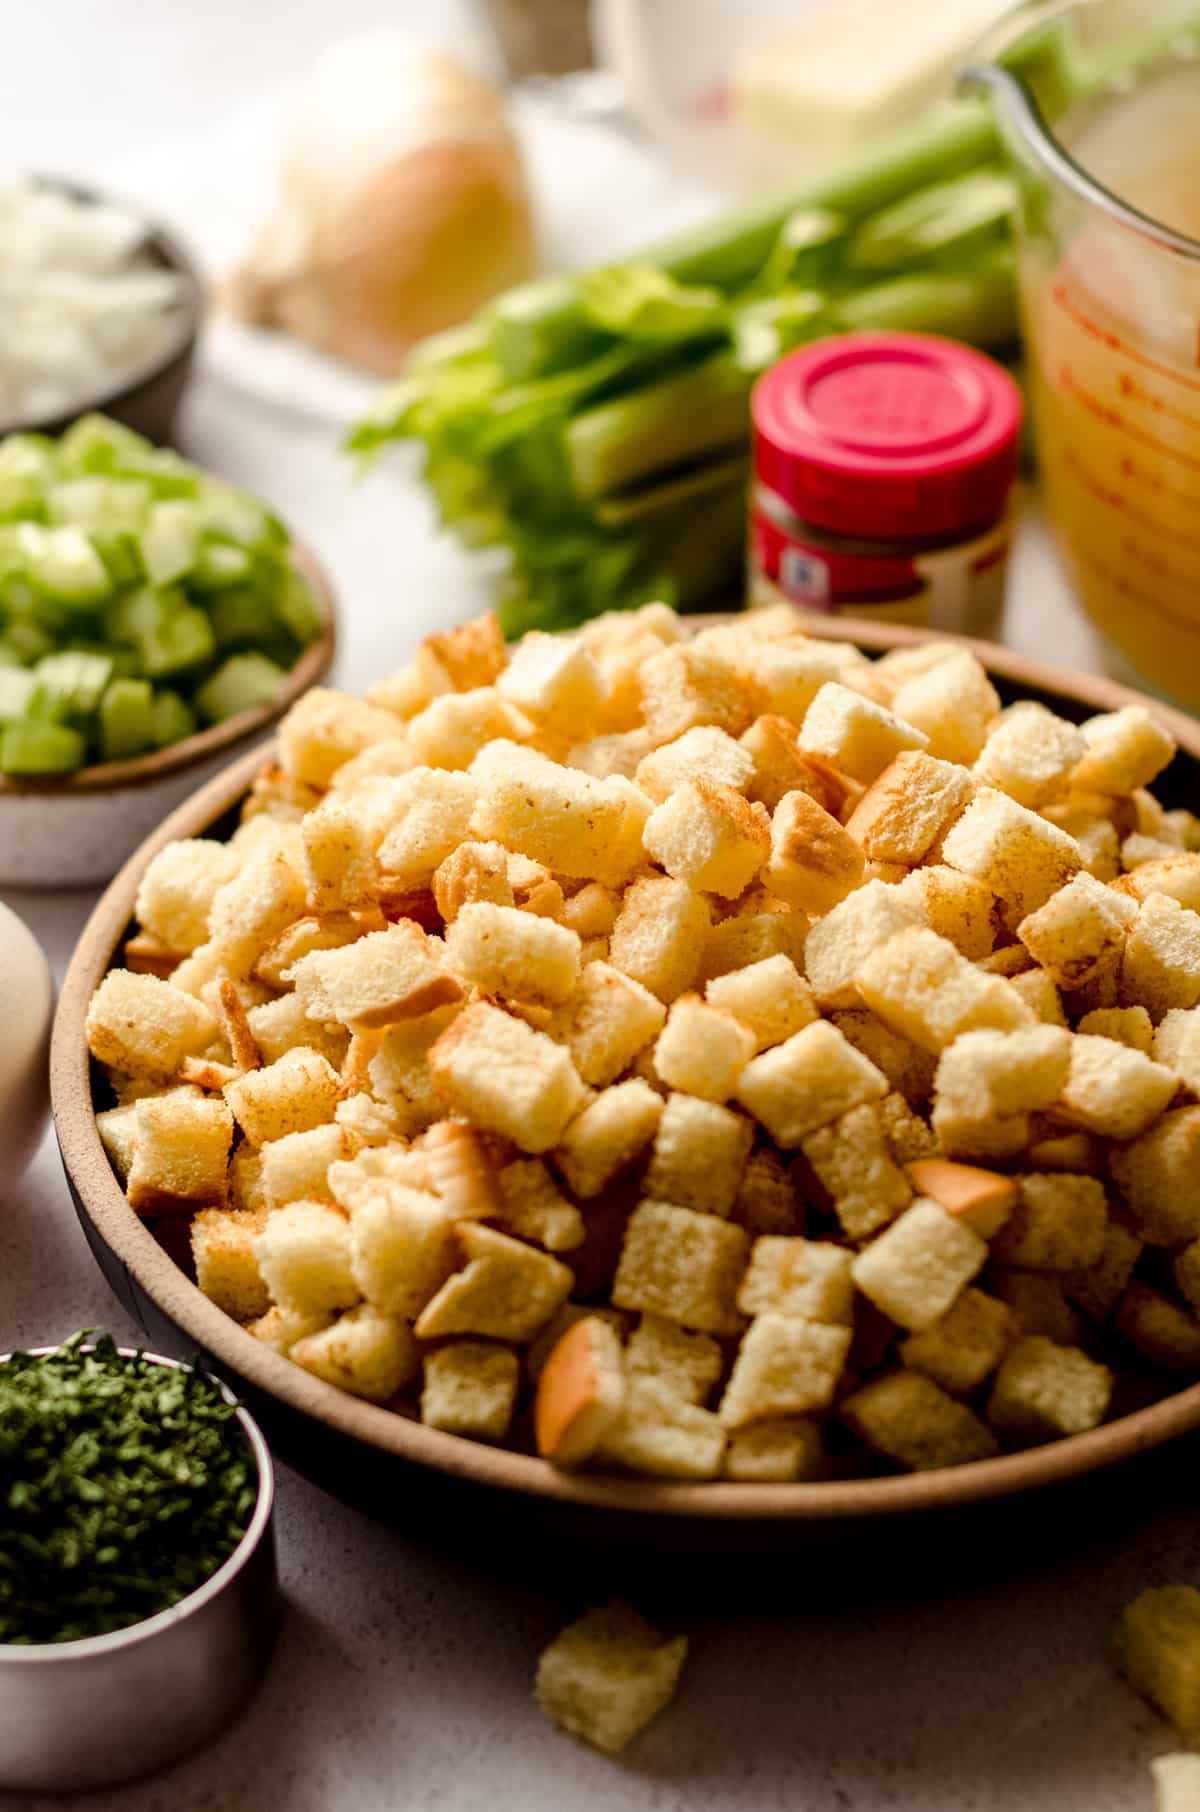 ingredients for traditional bread stuffing